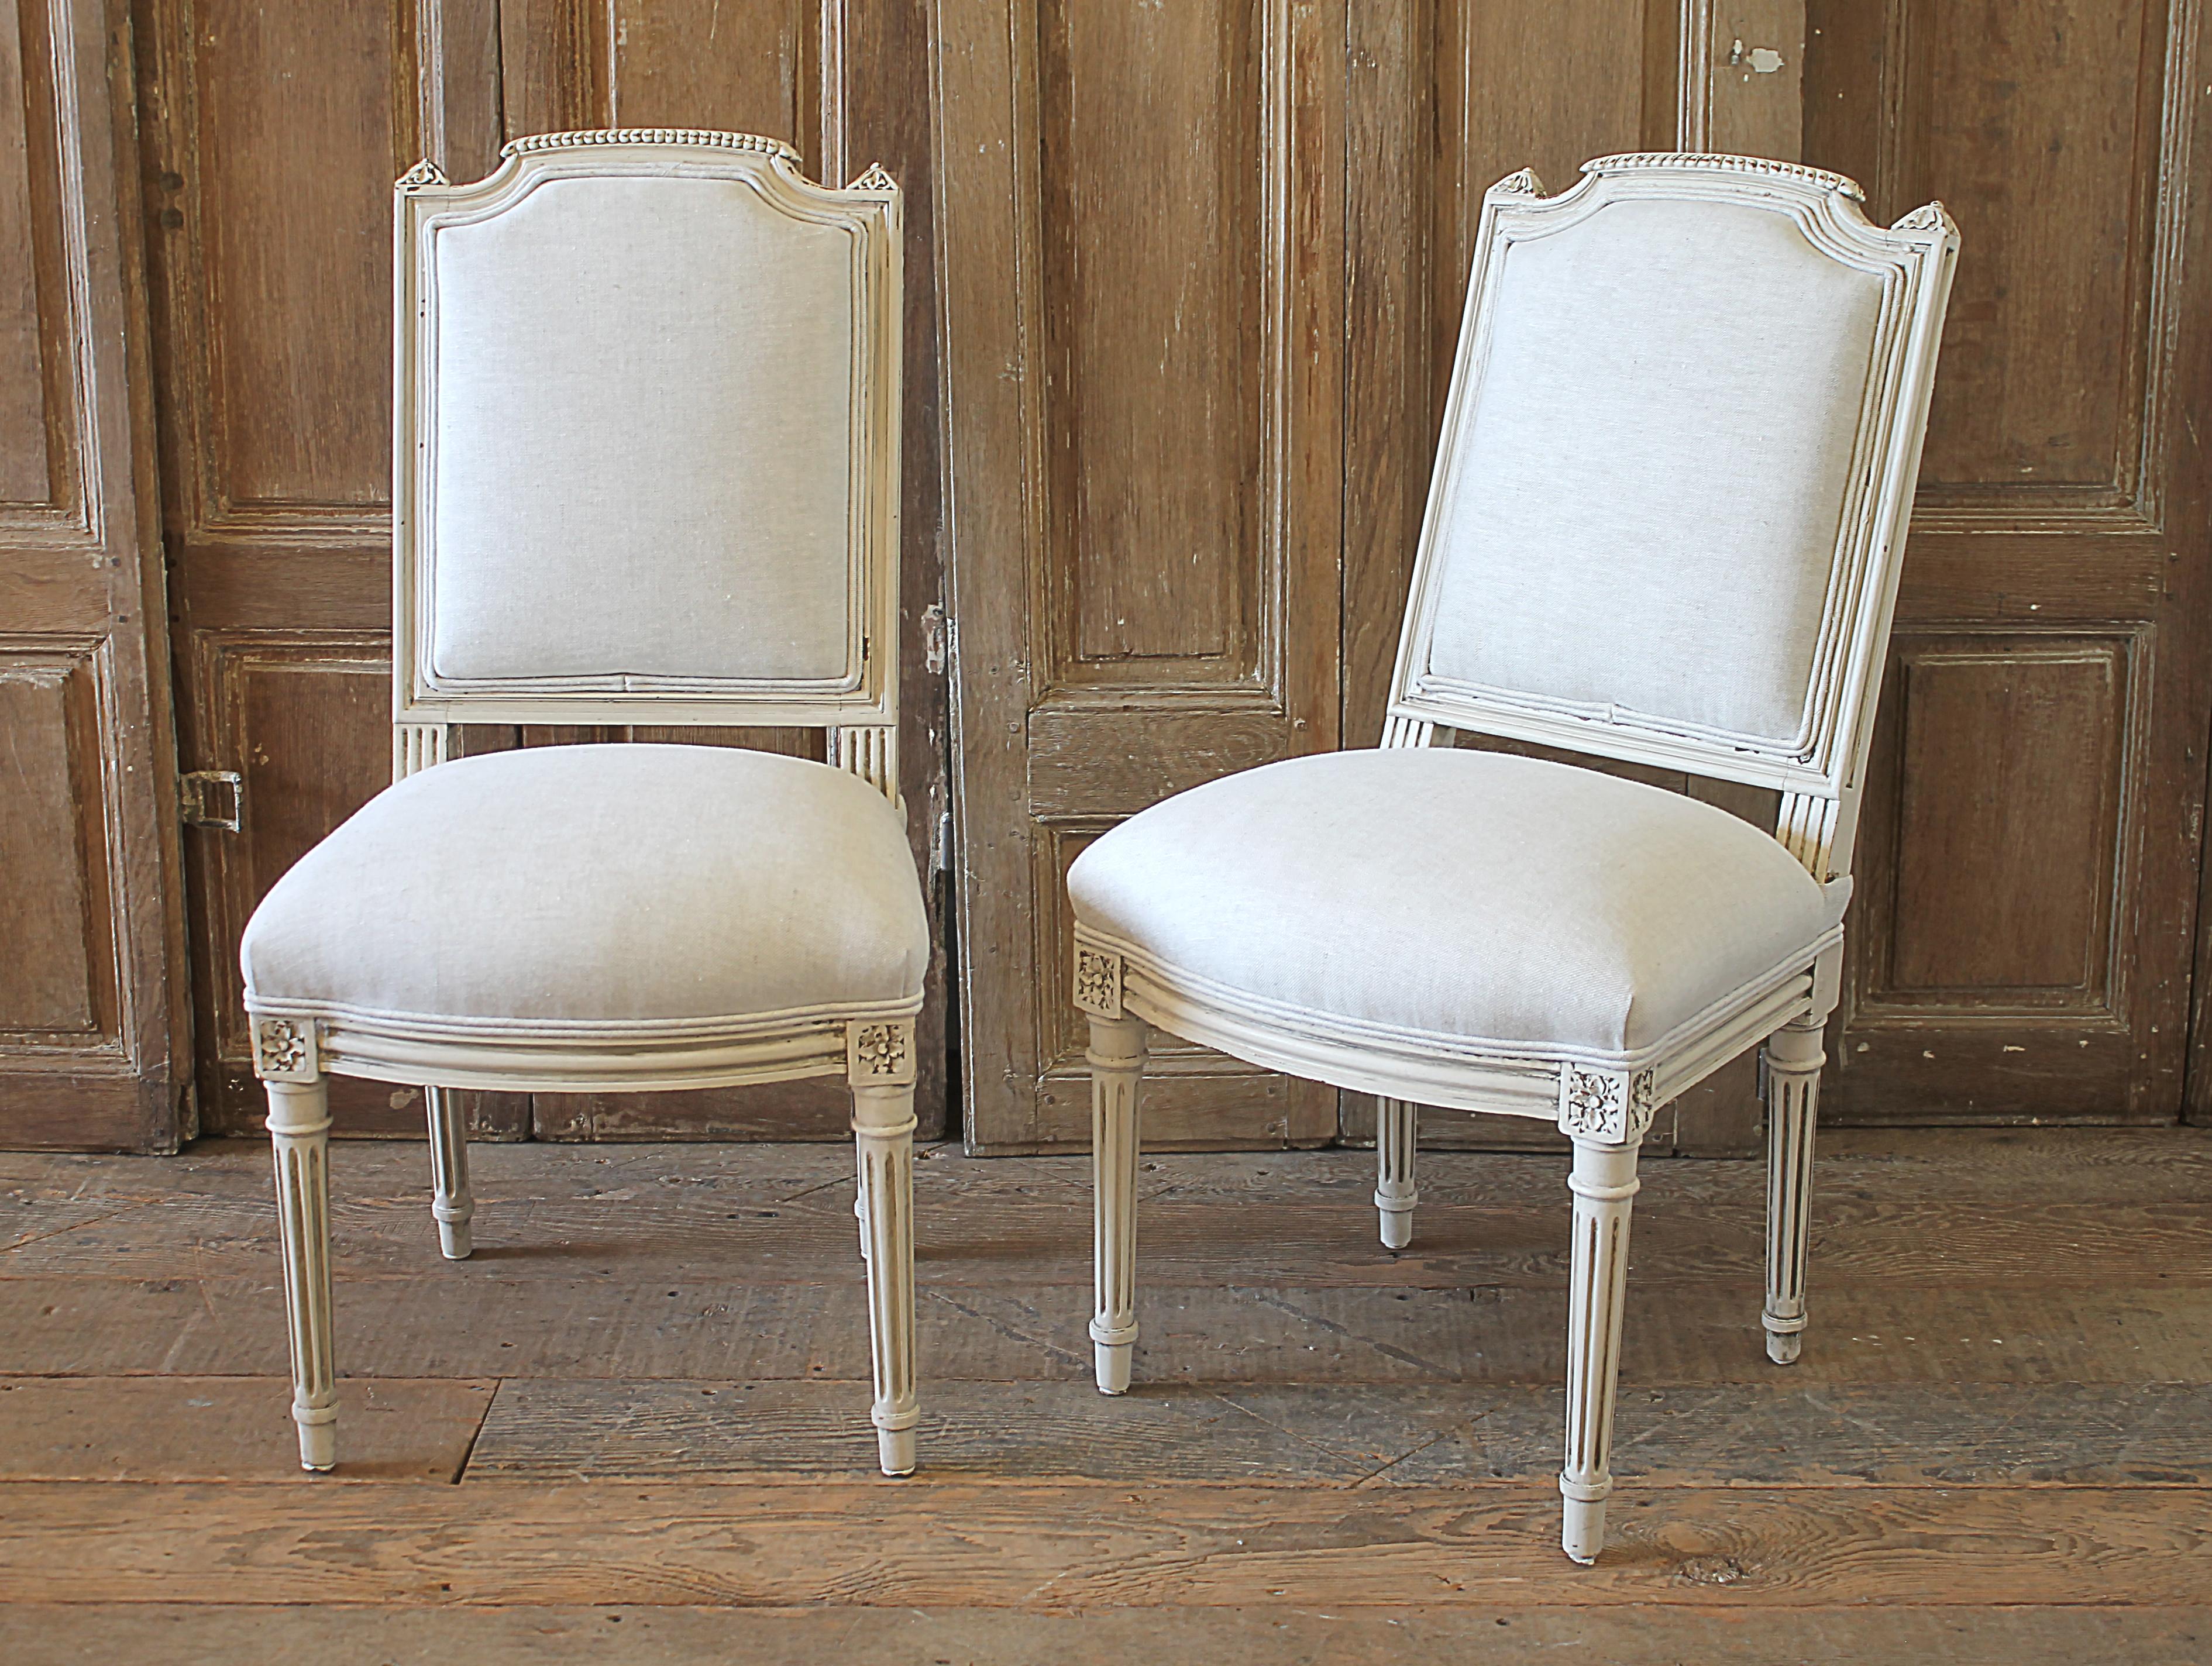 European Early 20th Century Pair of Painted and Upholstered Louis XVI Style Childs Chairs